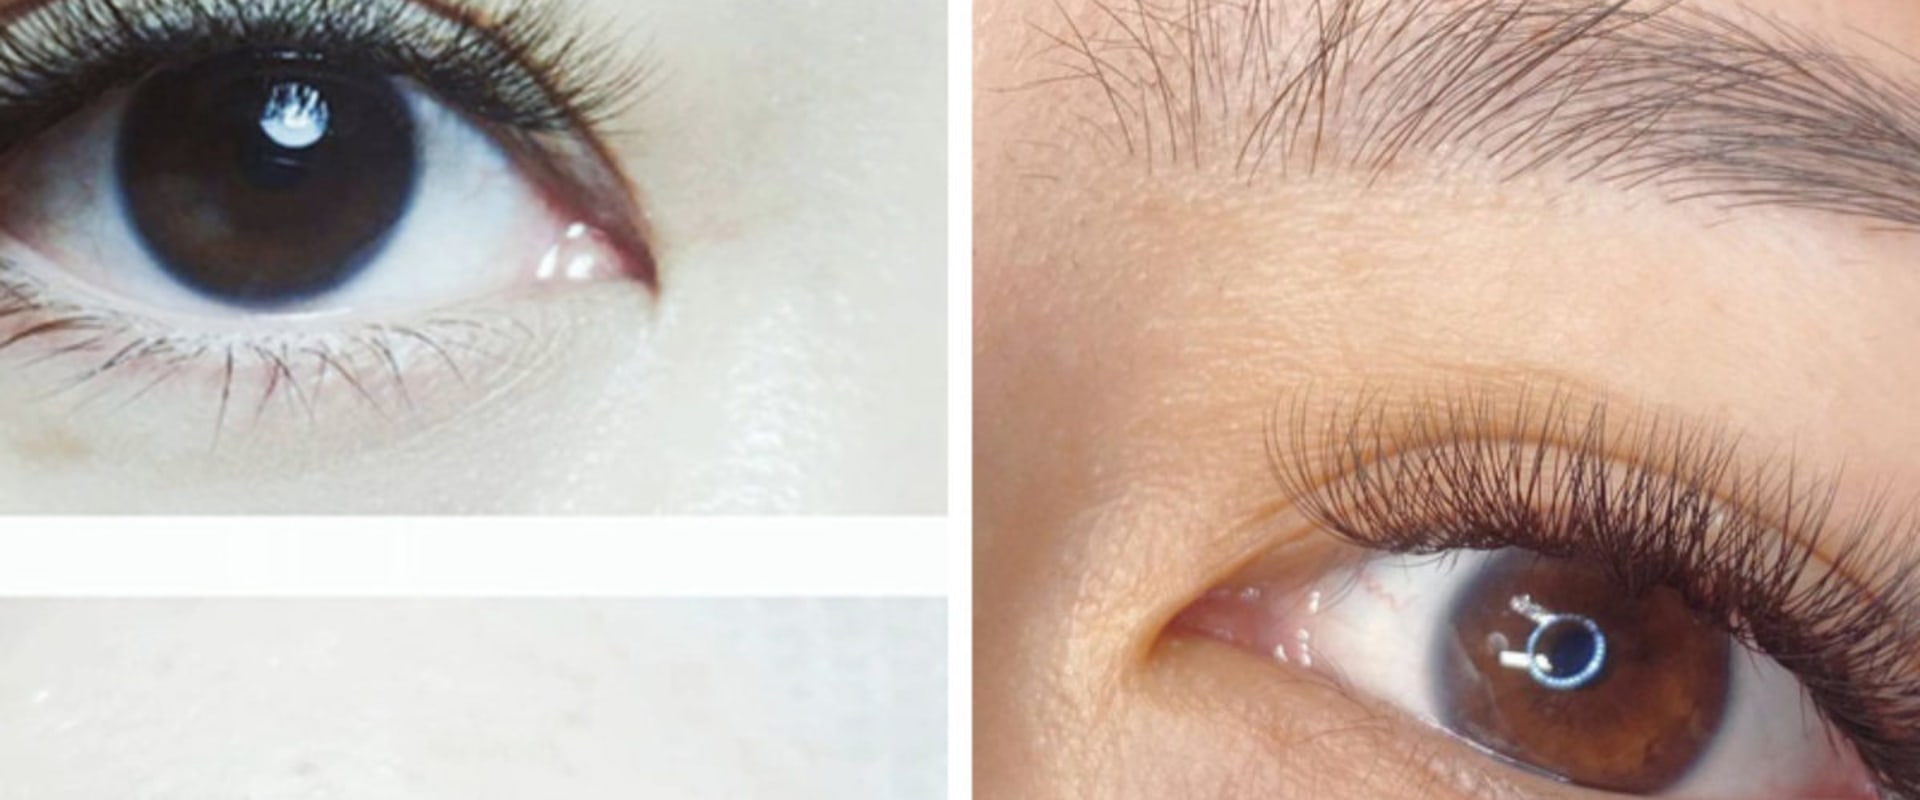 Are there natural looking lash extensions?